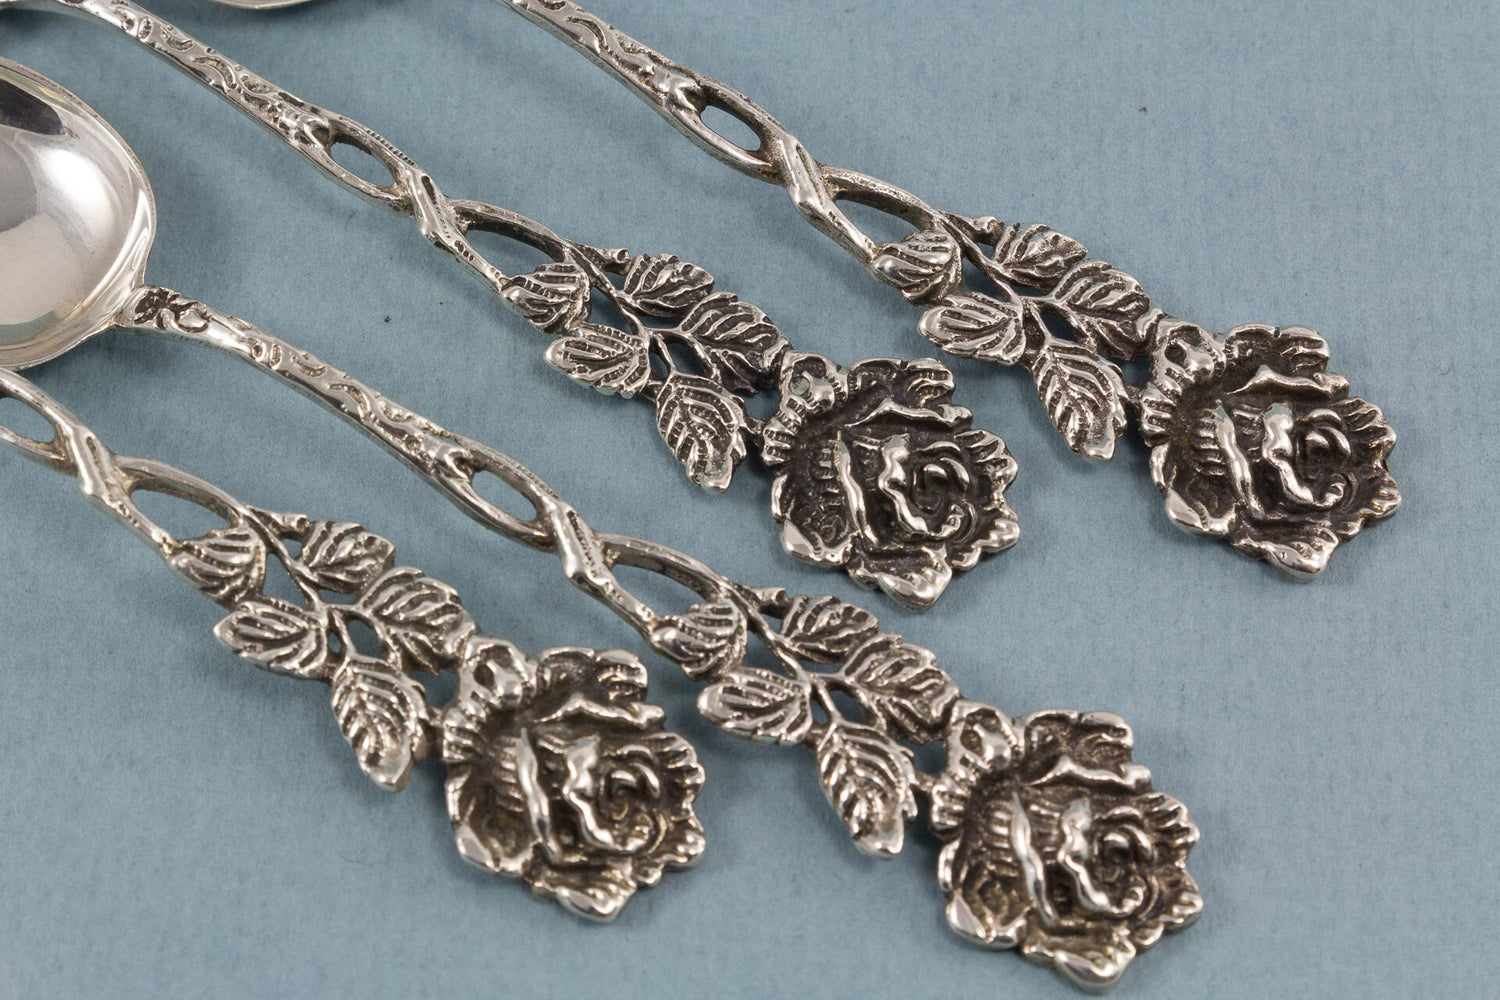 4 mocha spoons made of 835er silver, espresso spoon with roses 